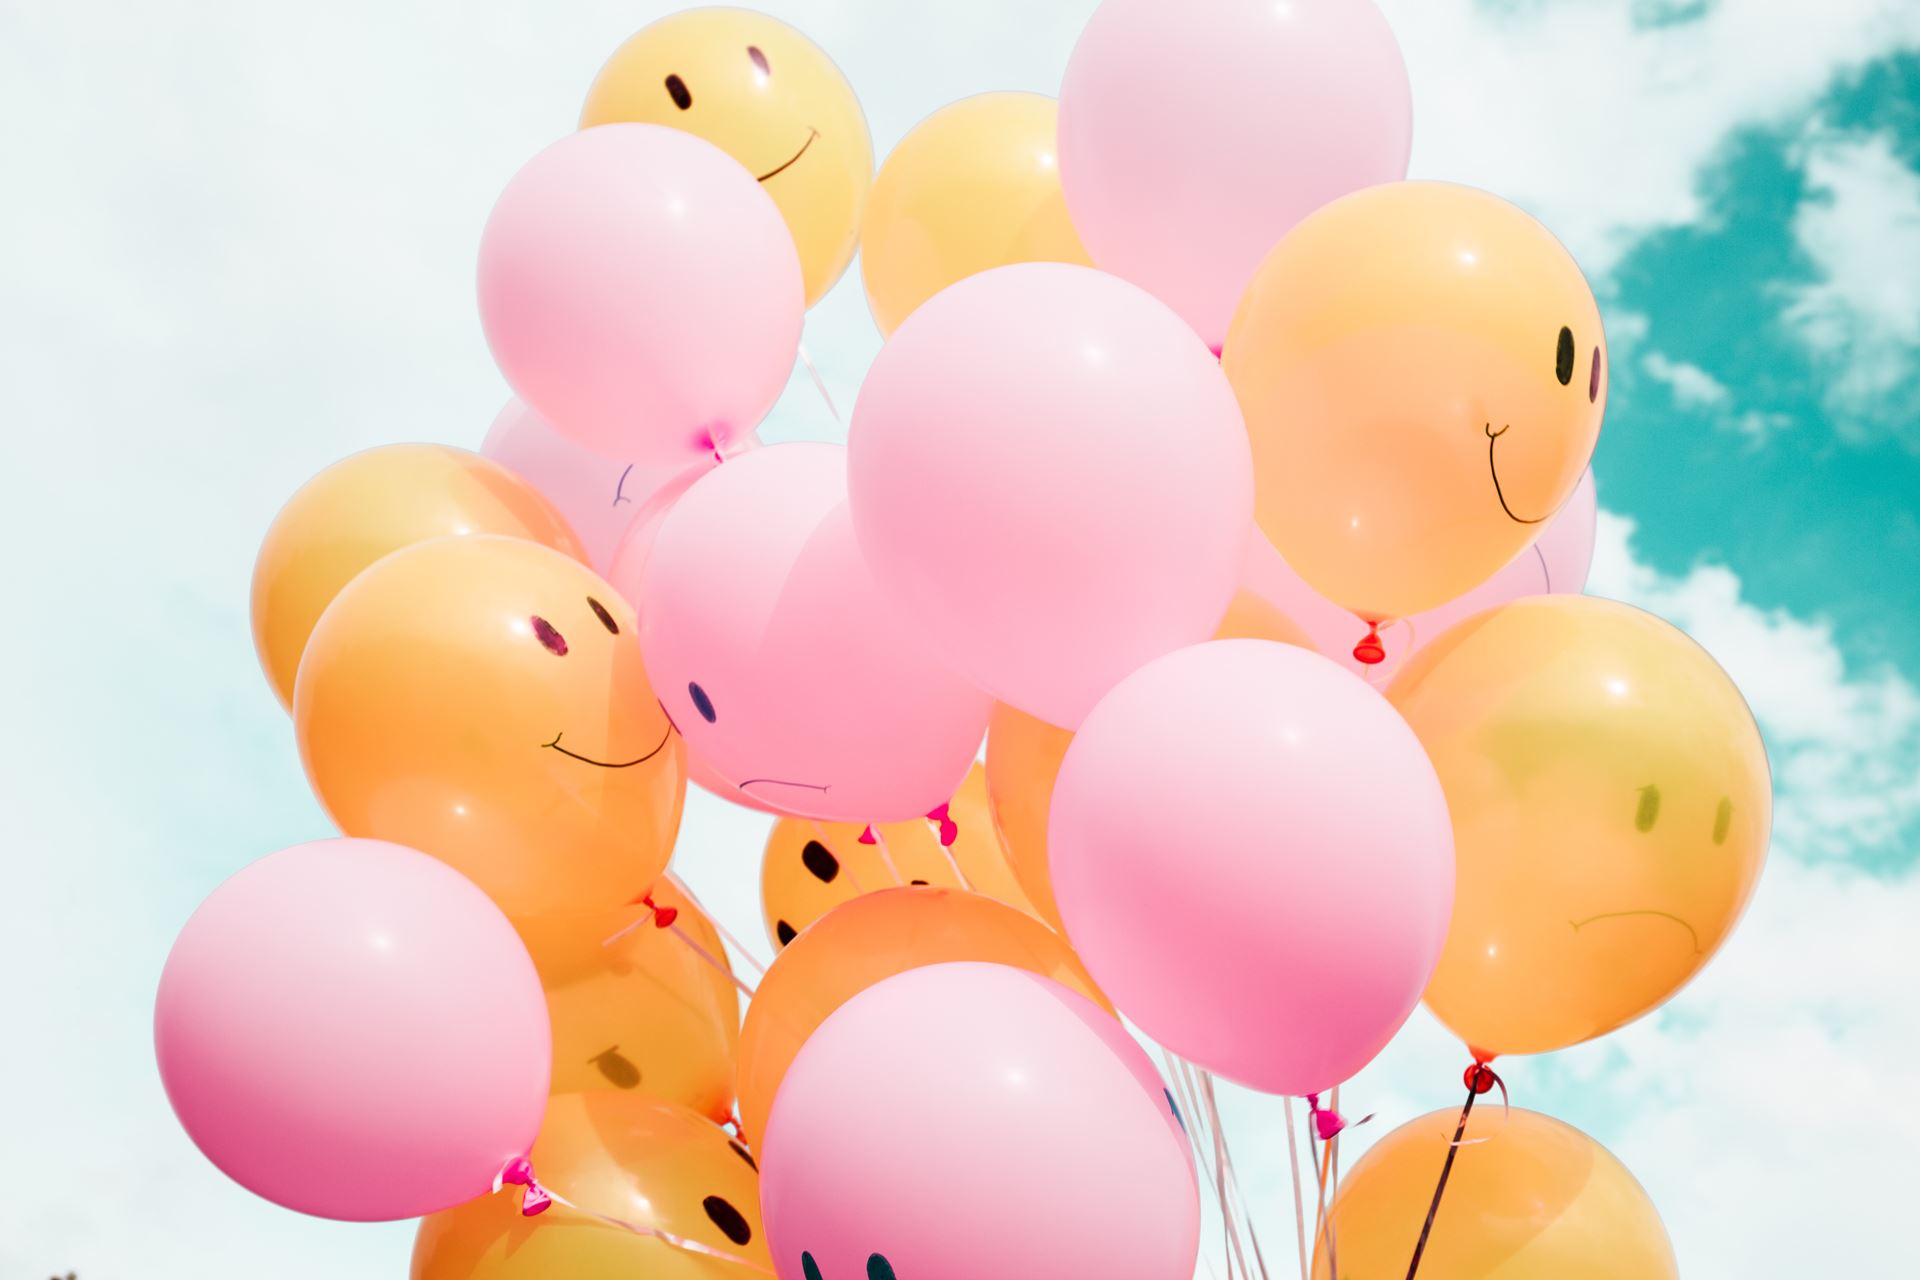 A cluster of balloons with smiley faces